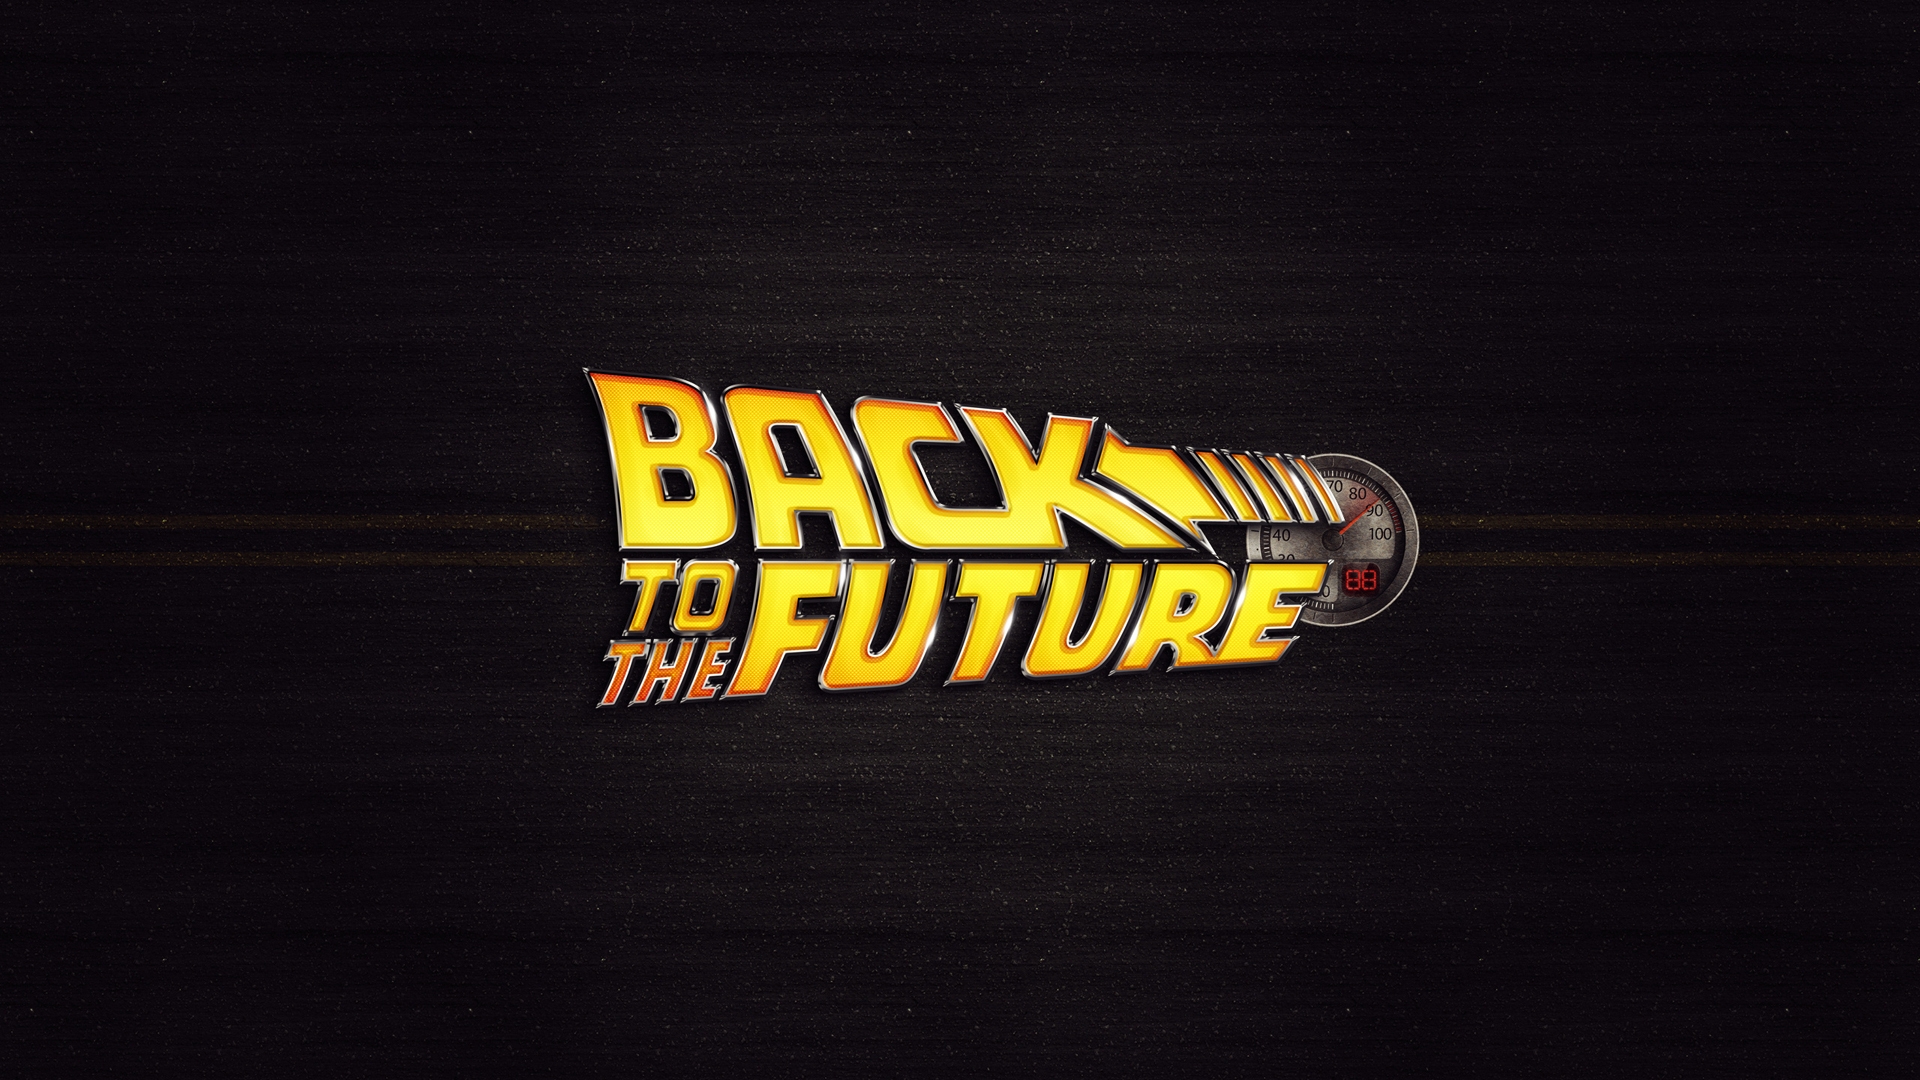 Home Movies HD Wallpapers Back To The Future Movie Wallpaper 1920x1080